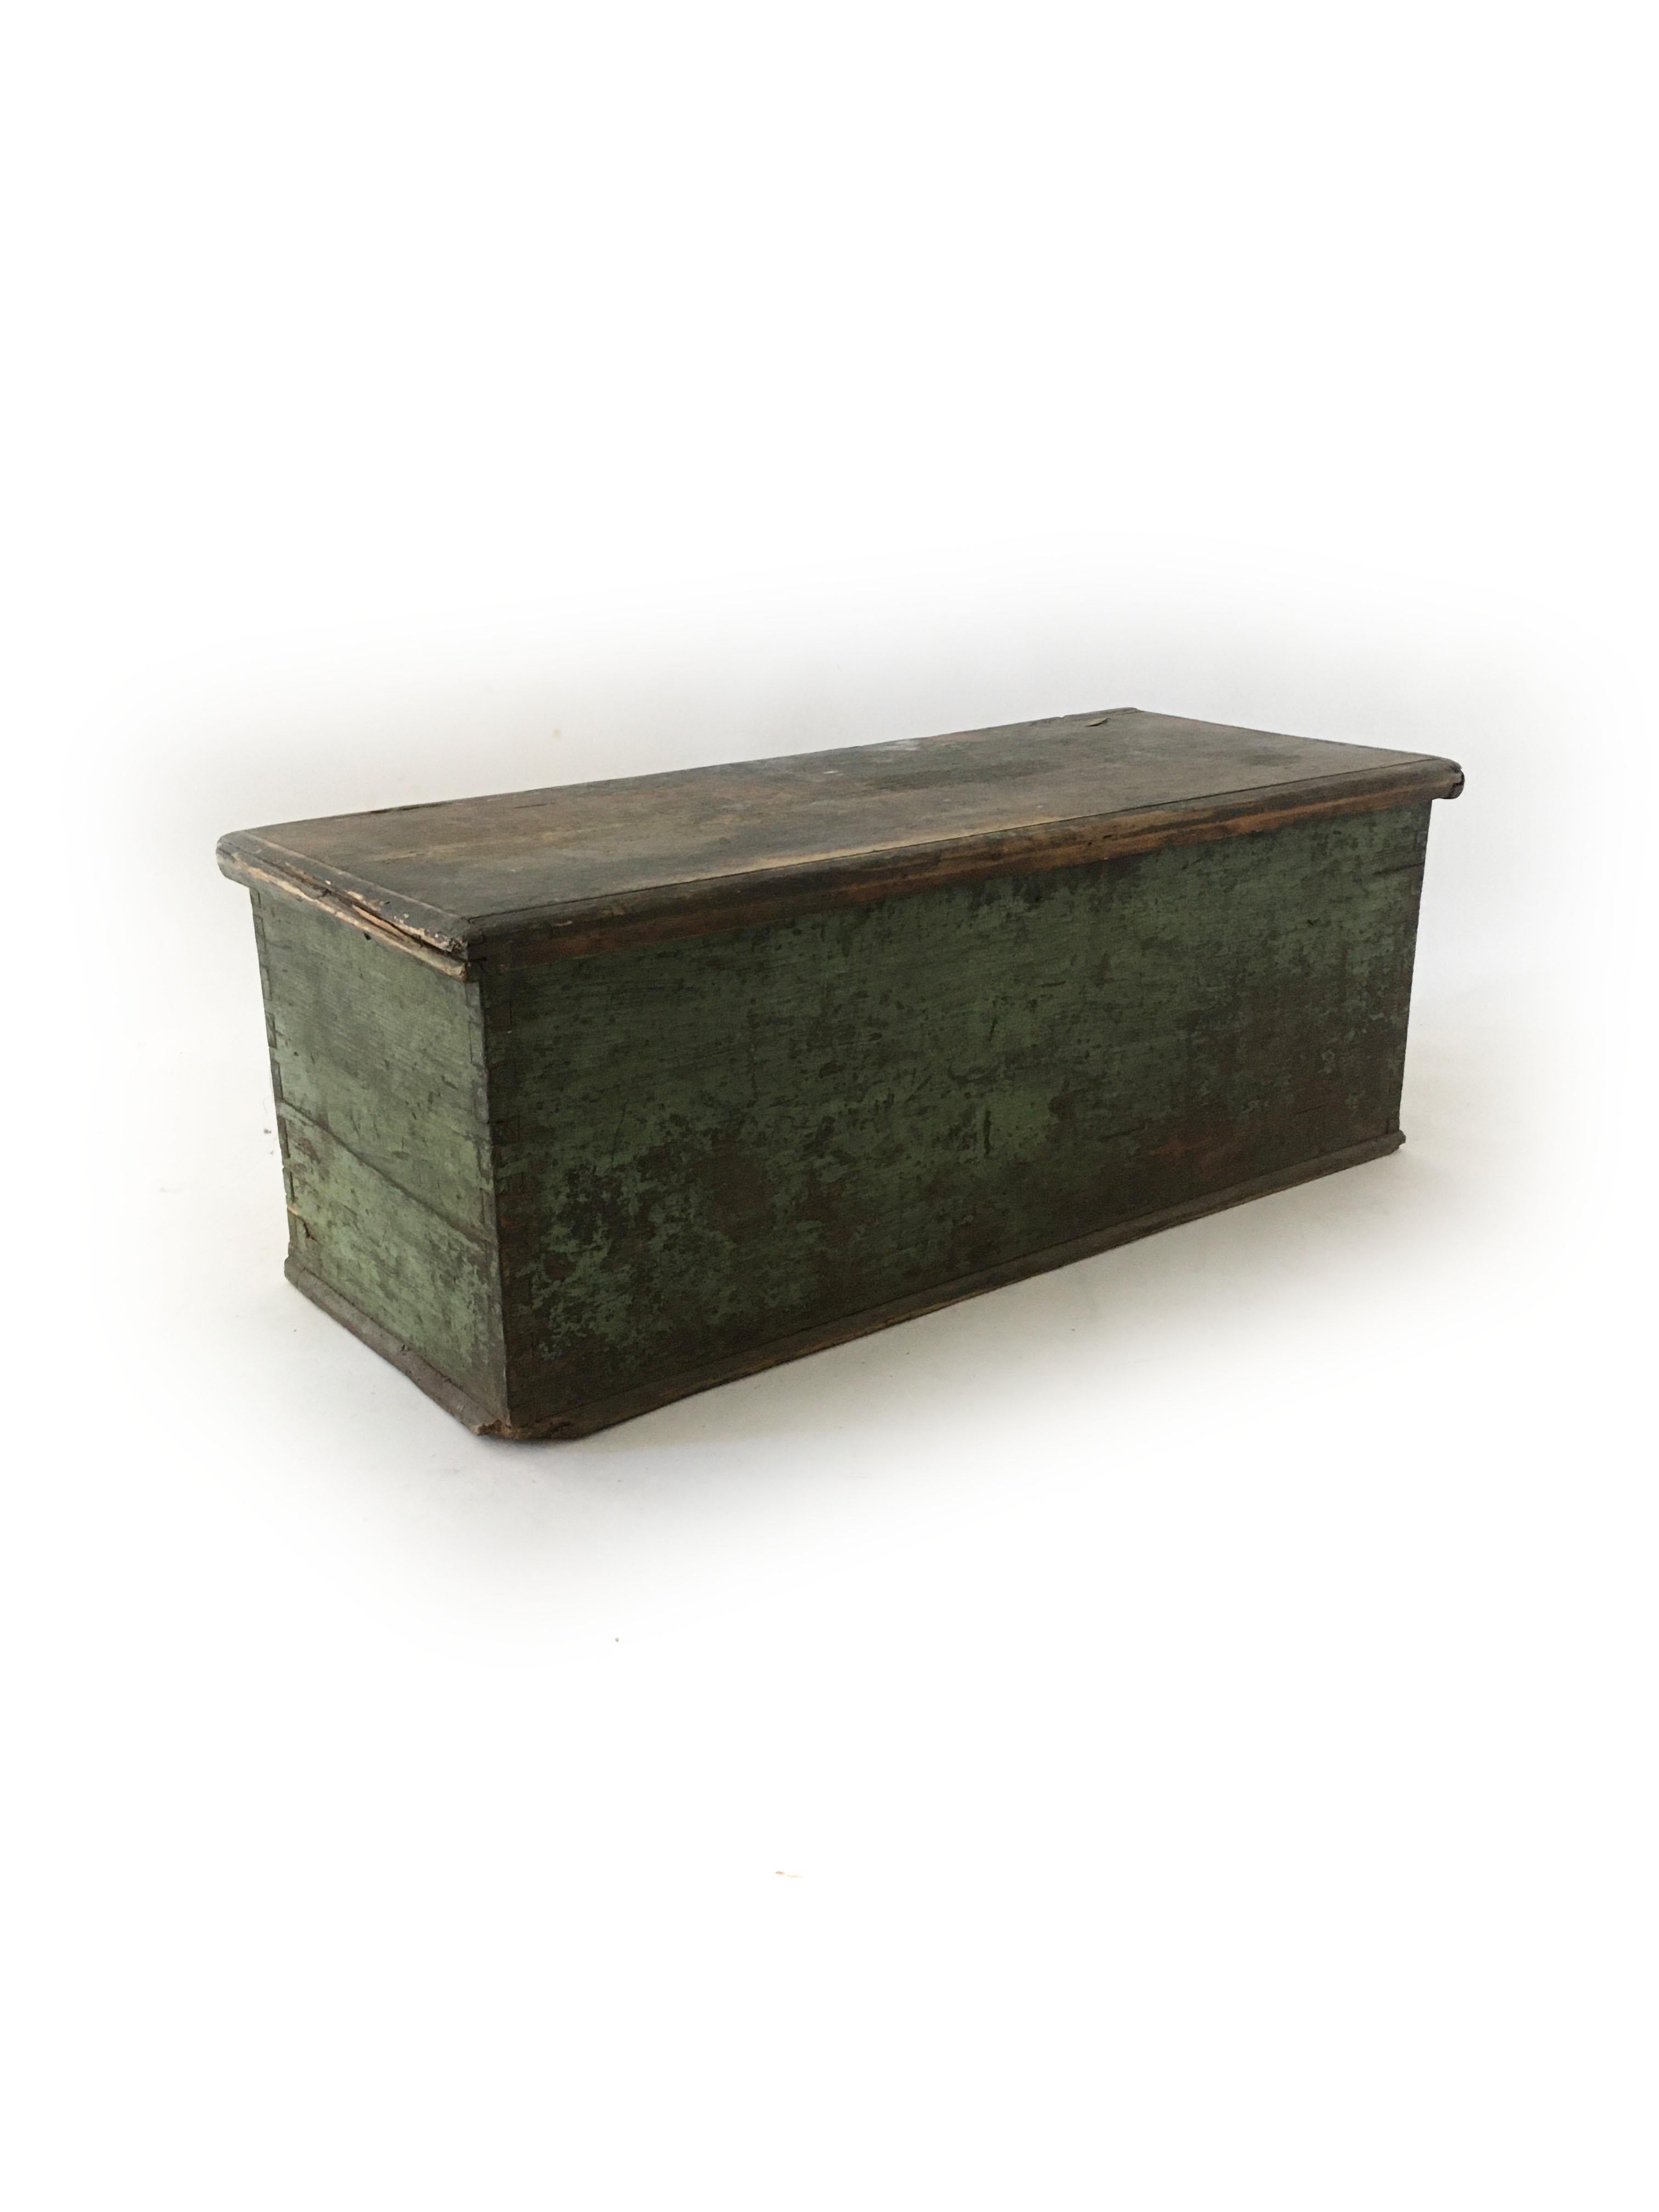 Vintage Rustic Wood Trunk, Gym Vignette Curated Style Statement, Austria, 1930s For Sale 10